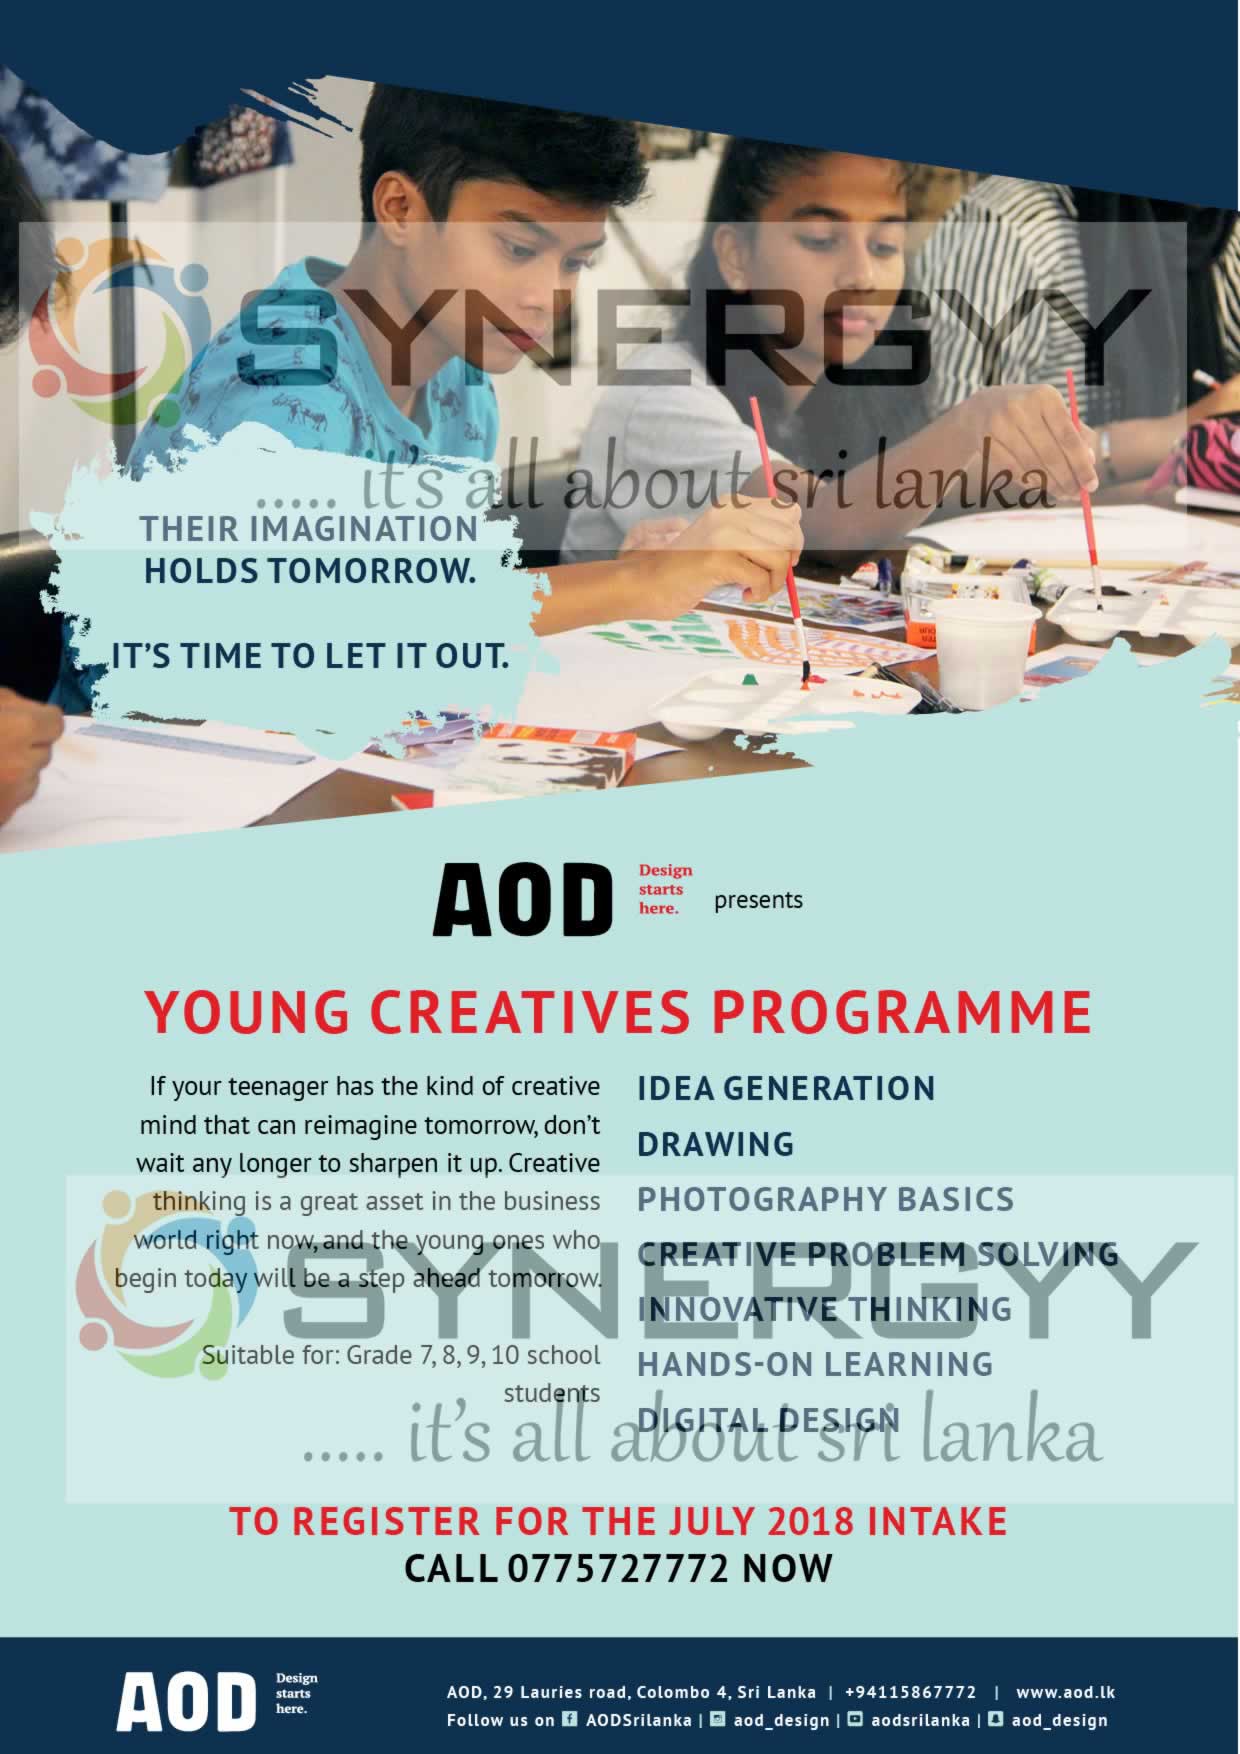 Academy of Design (AOD) Young Creatives Programme – July 2018 intakes